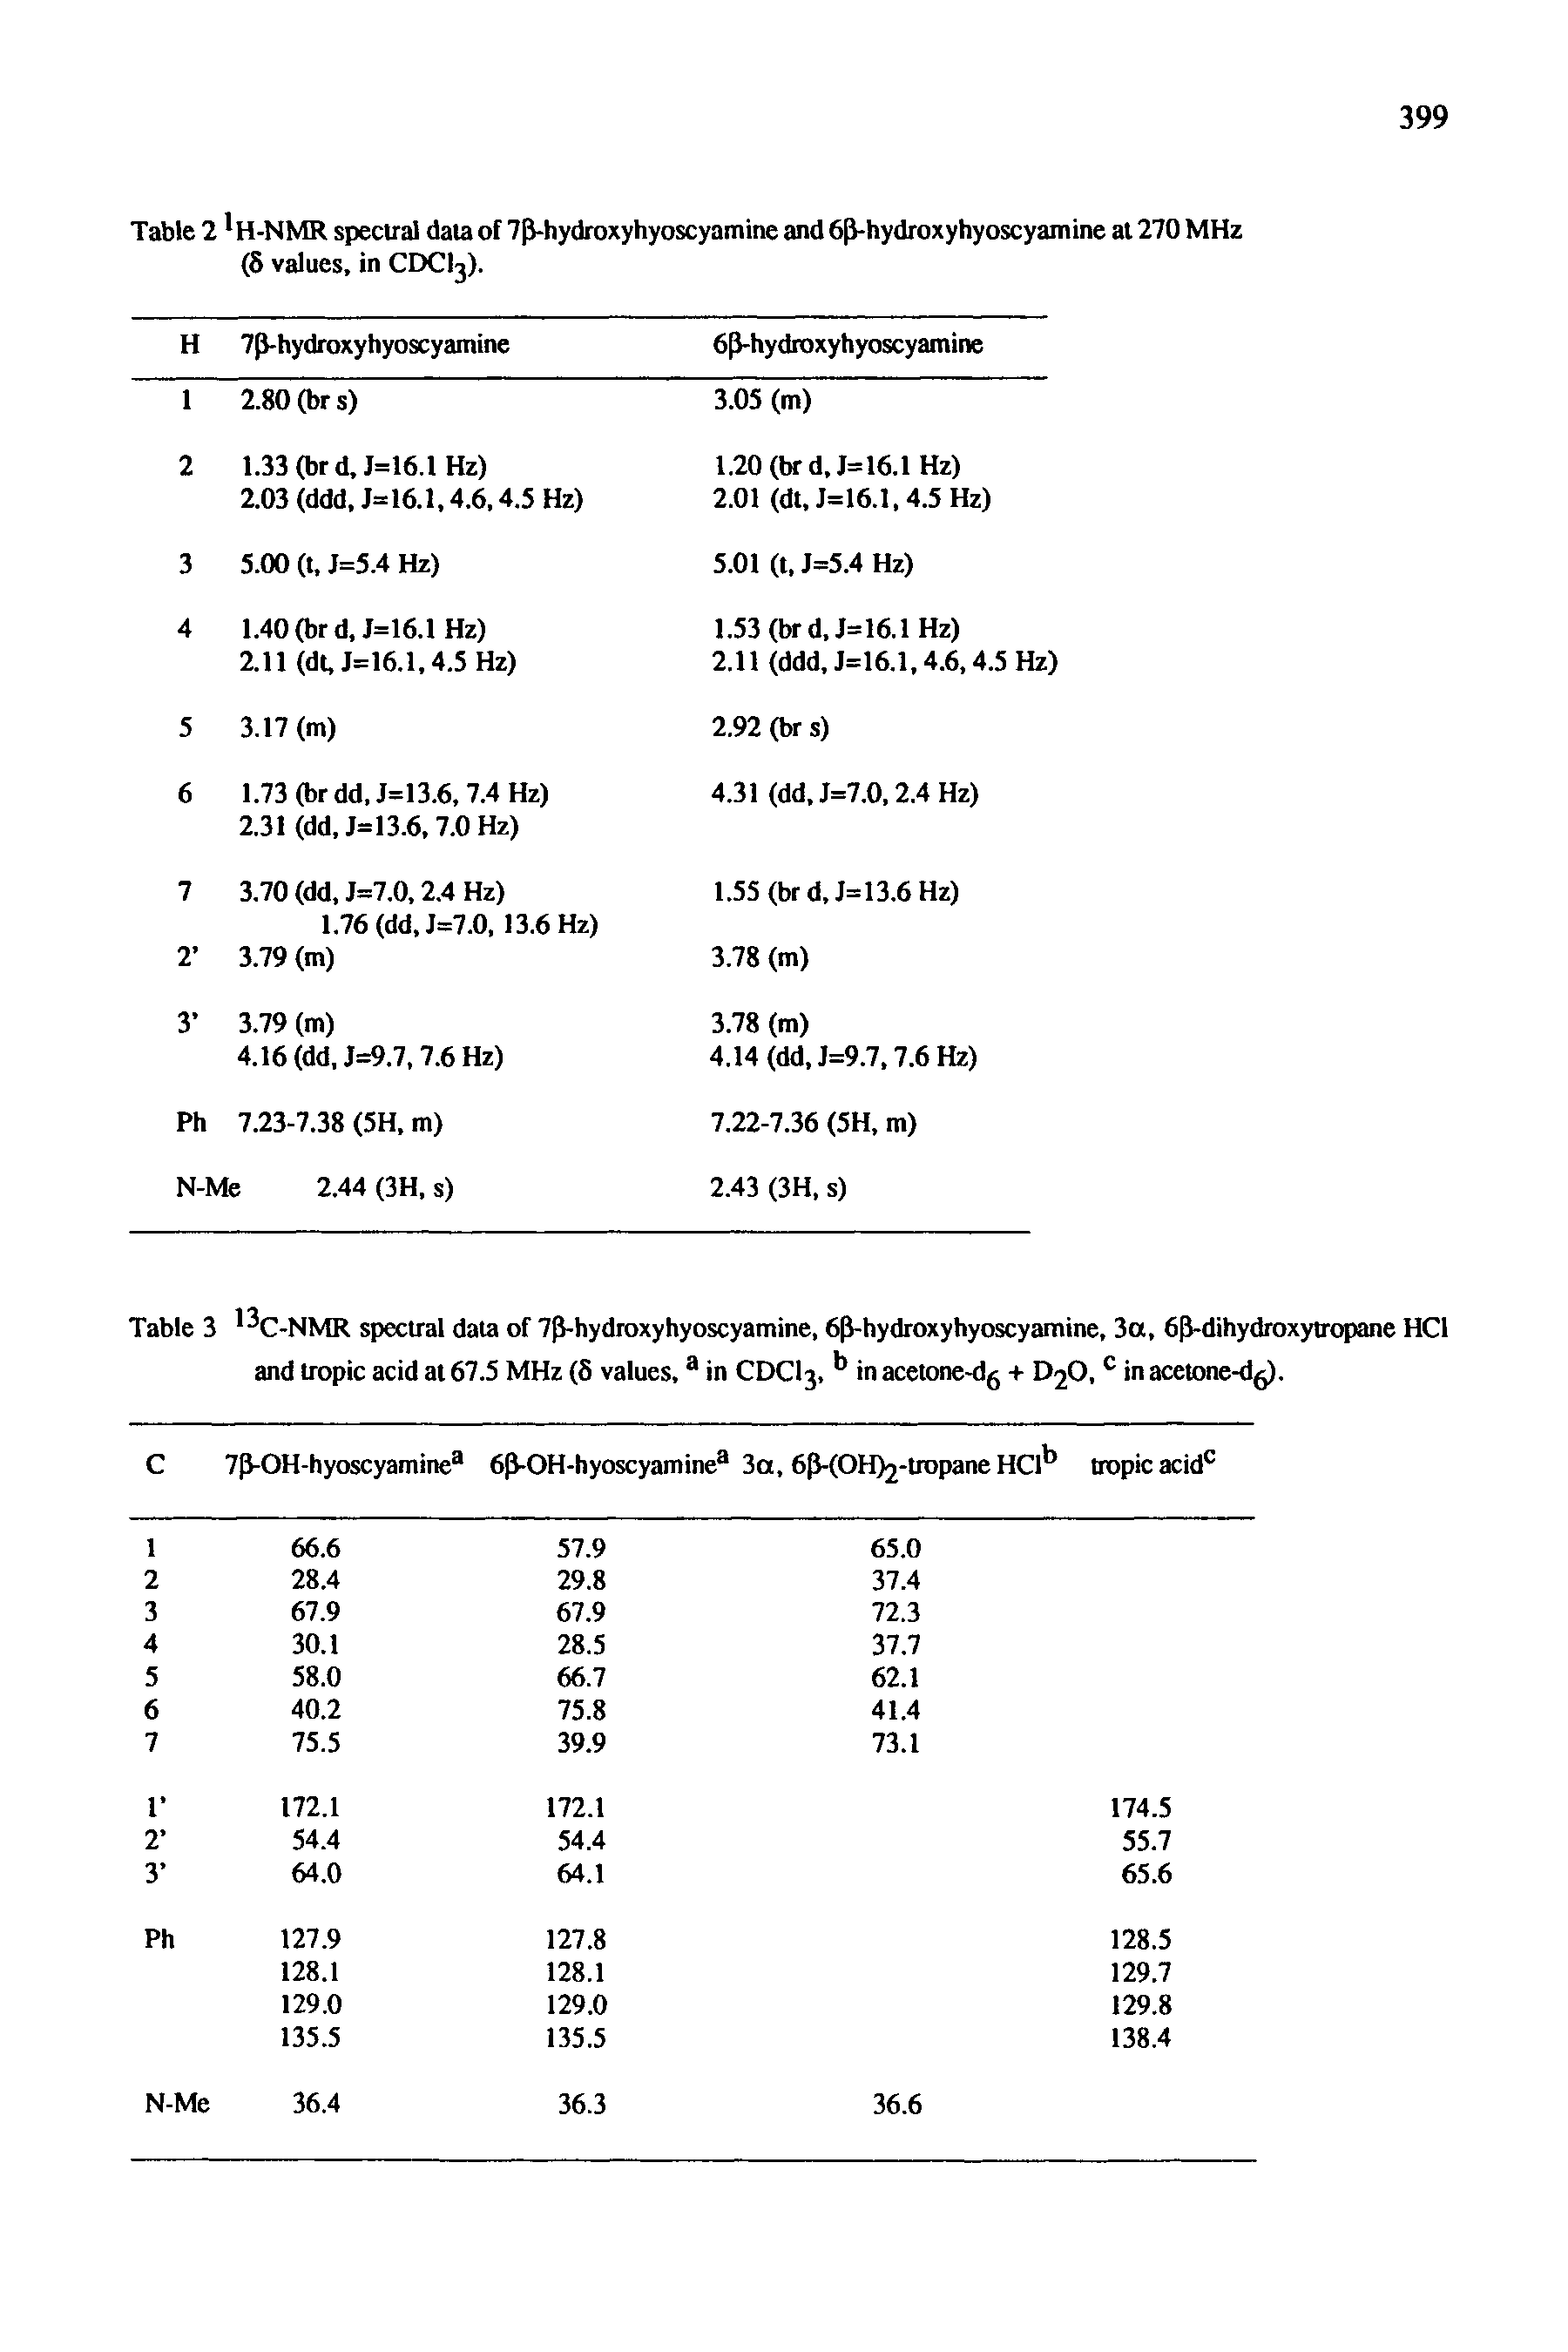 Table 3 C-NMR spectral data of 7P-hydroxyhyoscyamine, 6p-hydroxyhyoscyamine, 3a, 6P-dihydroxytropane HCl and tropic acid at 67.5 MHz (5 values, in CDCI3, in acetone-dg + D2O, " in acetone-dg).